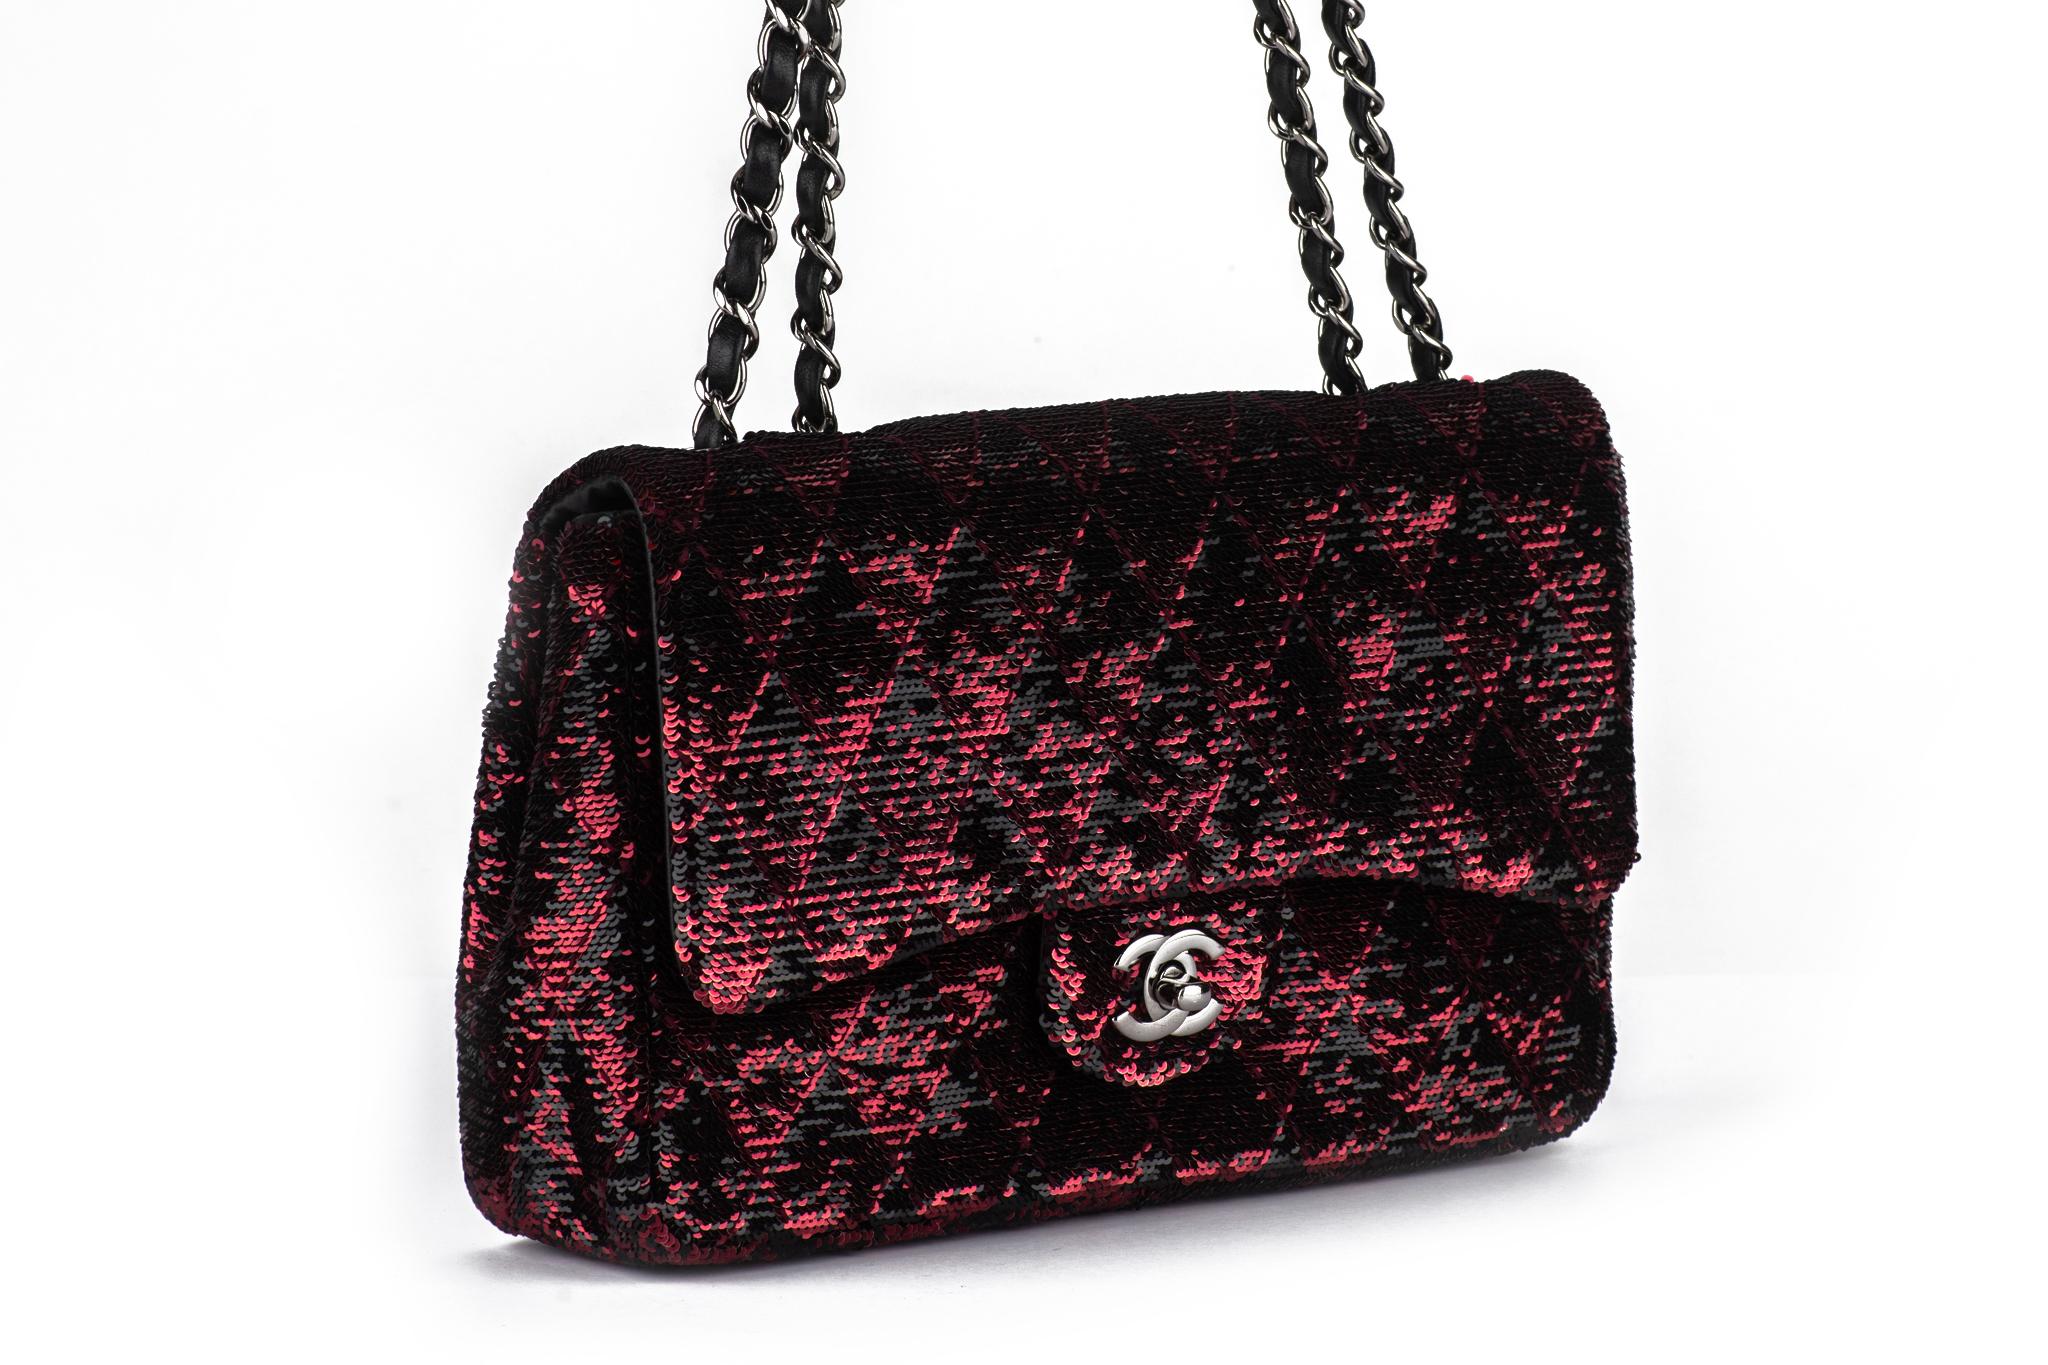 Chanel Red Black Sequins Single Flap Bag In Excellent Condition For Sale In West Hollywood, CA